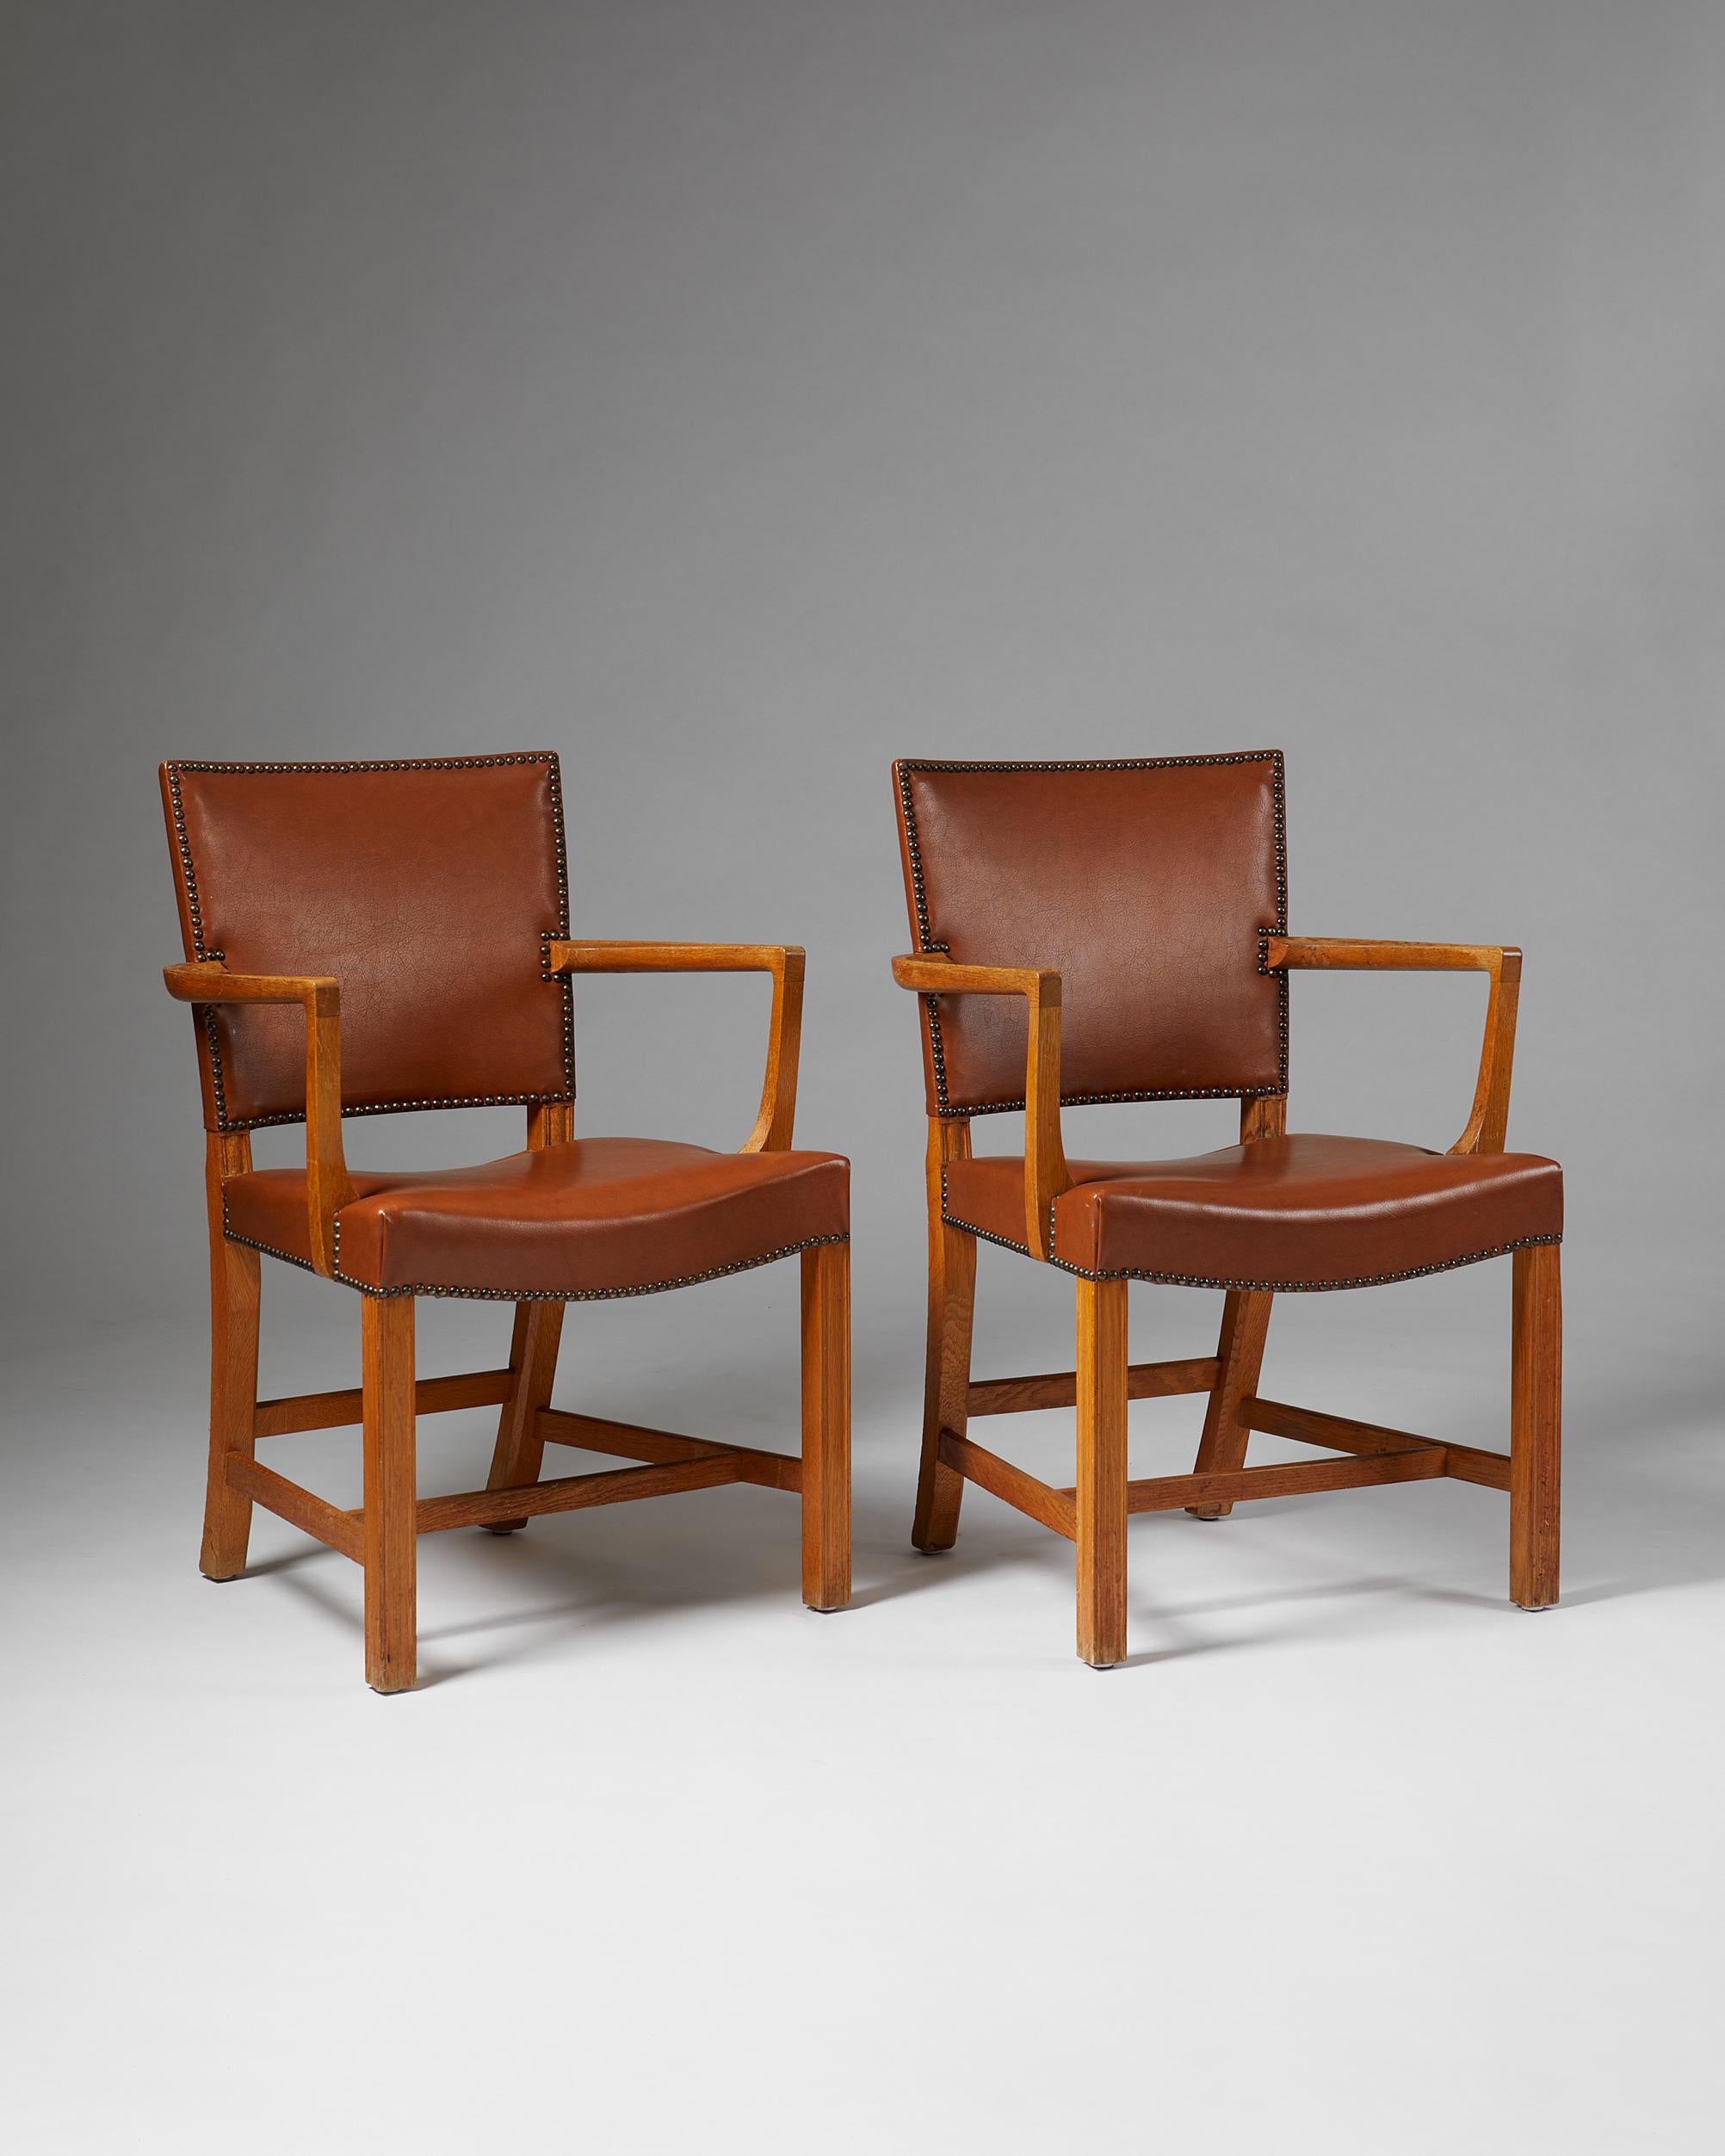 Mid-Century Modern Pair of Armchairs “The Red Chair” Designed by Kaare Klint for Rud. Rasmussen For Sale